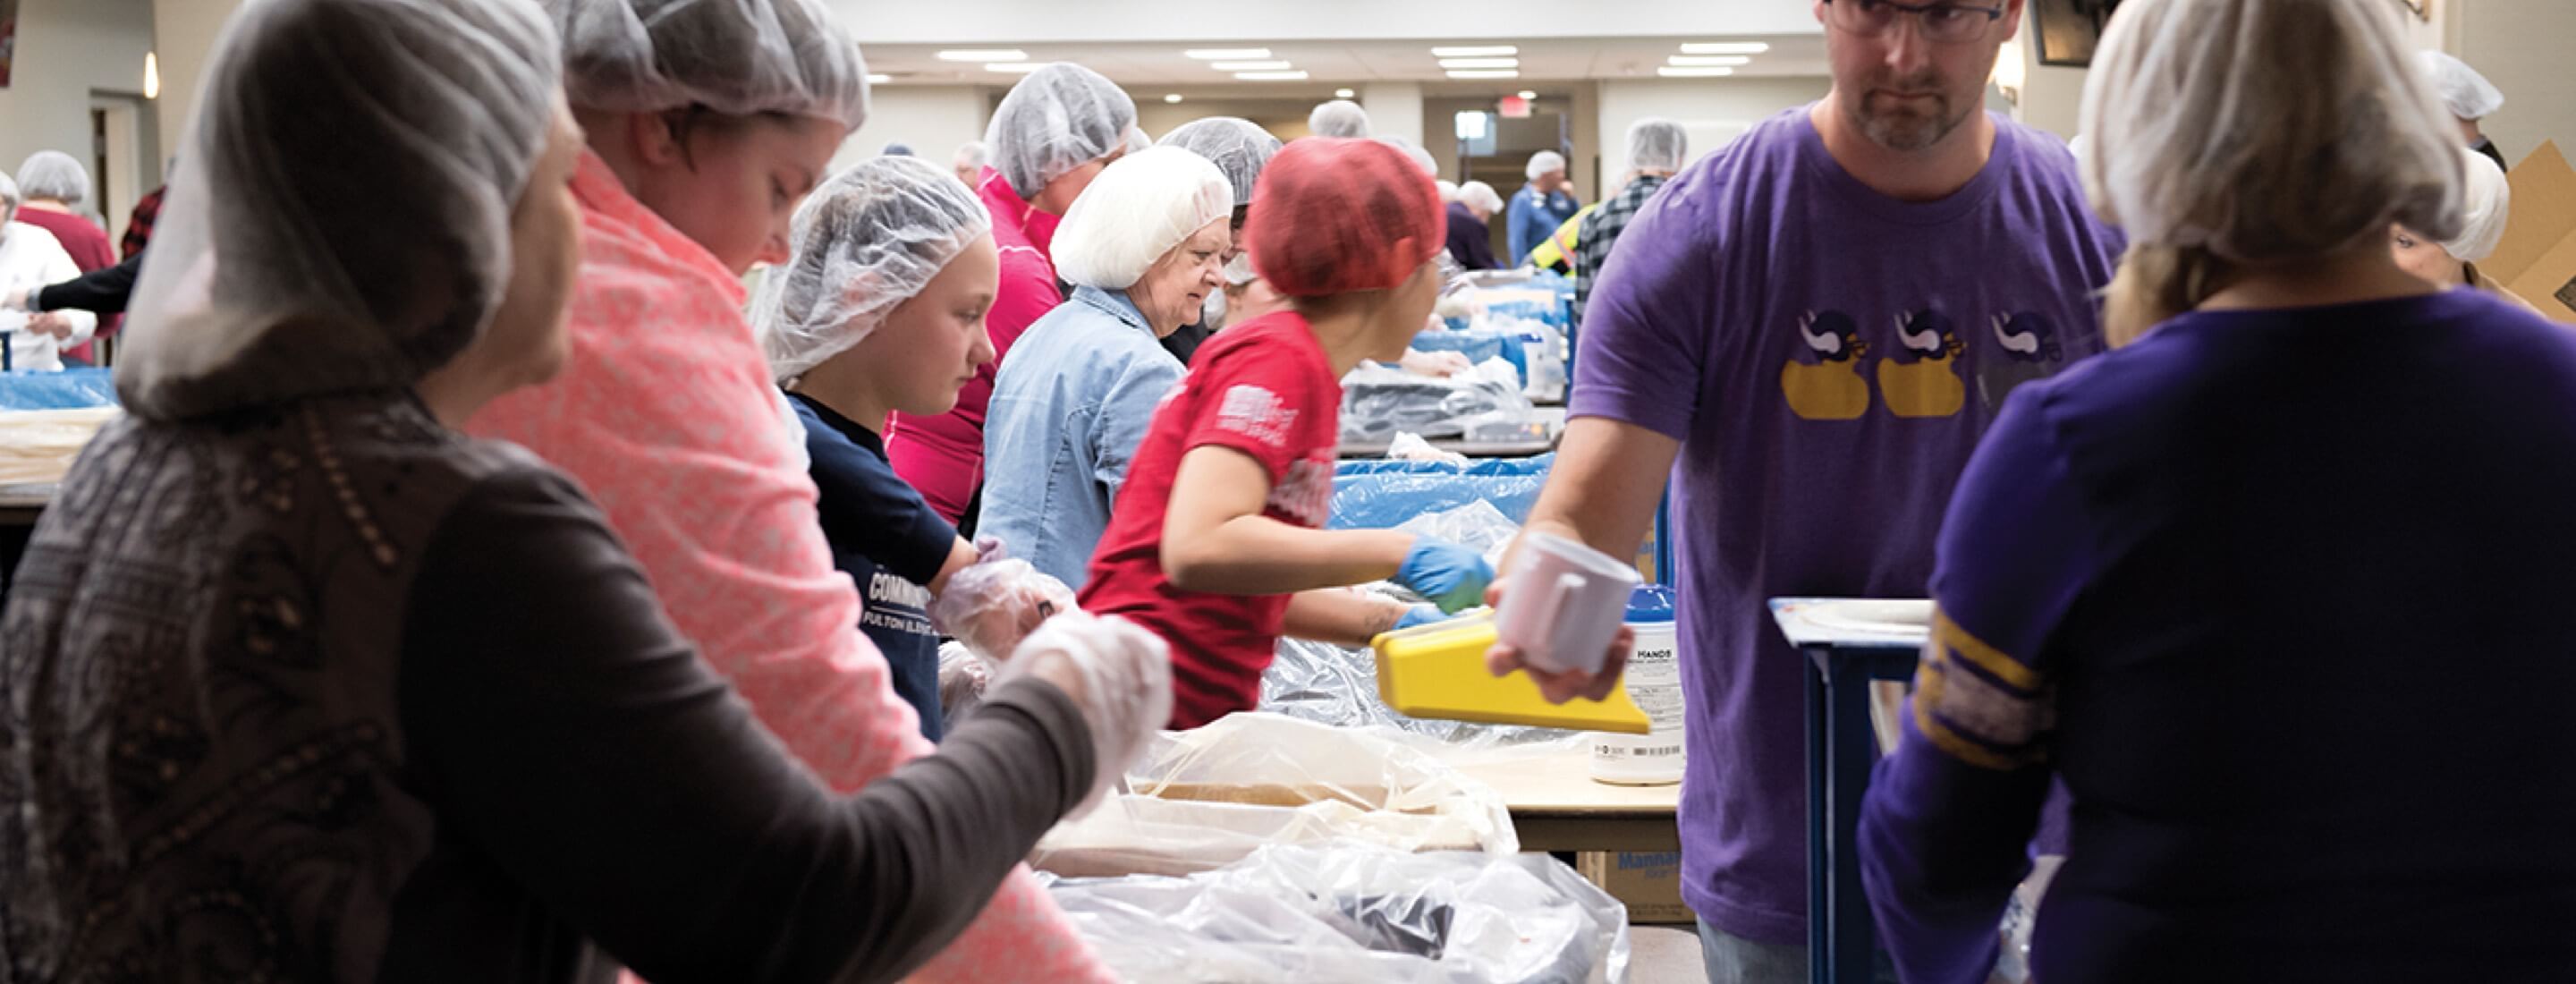 group serving while doing charity work